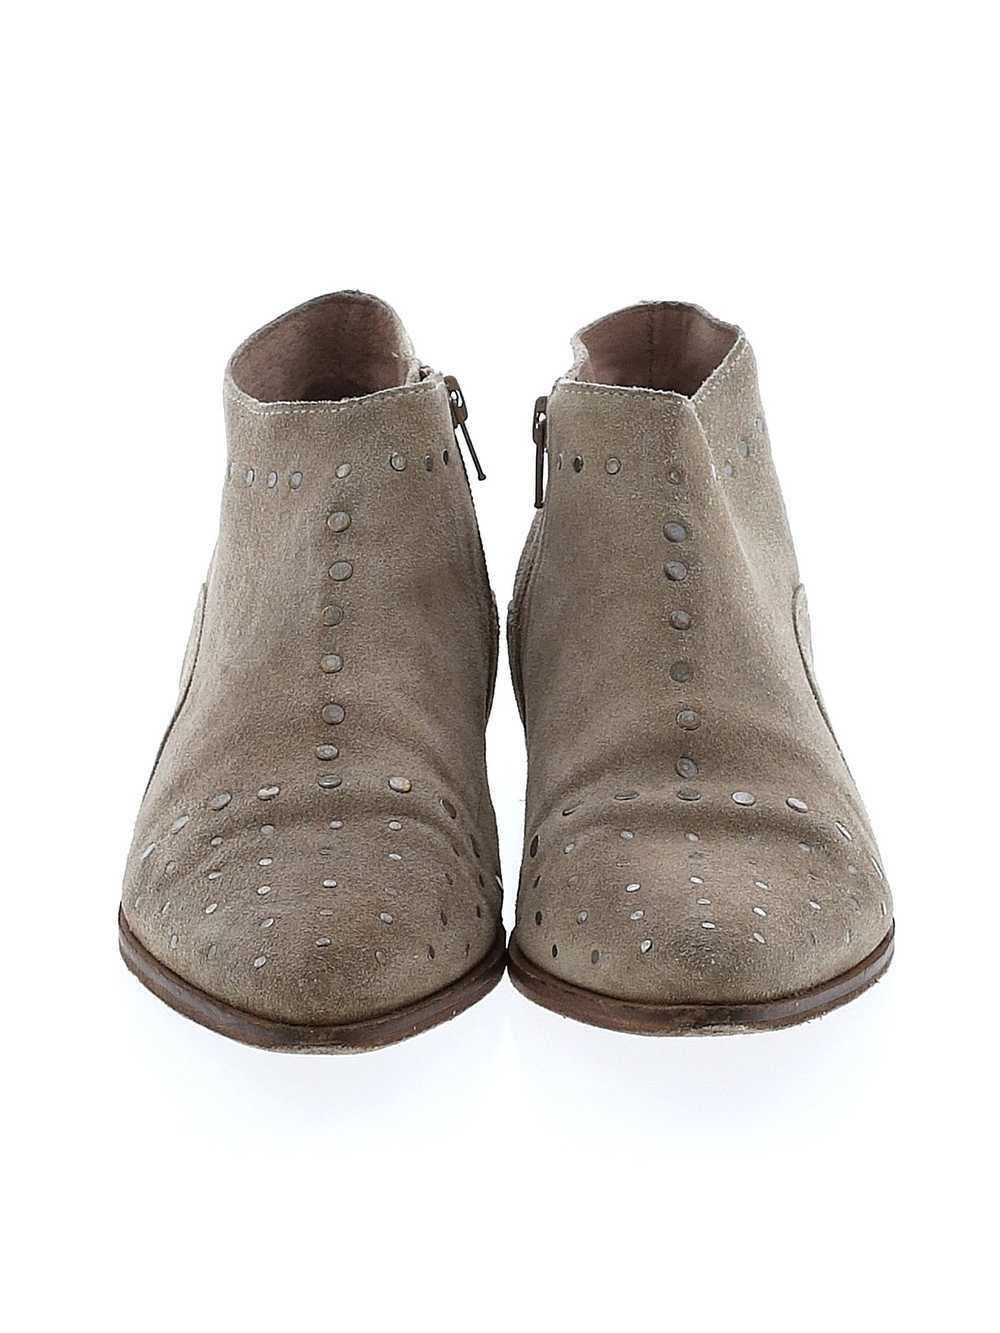 Free People Women Brown Ankle Boots 38 eur - image 2